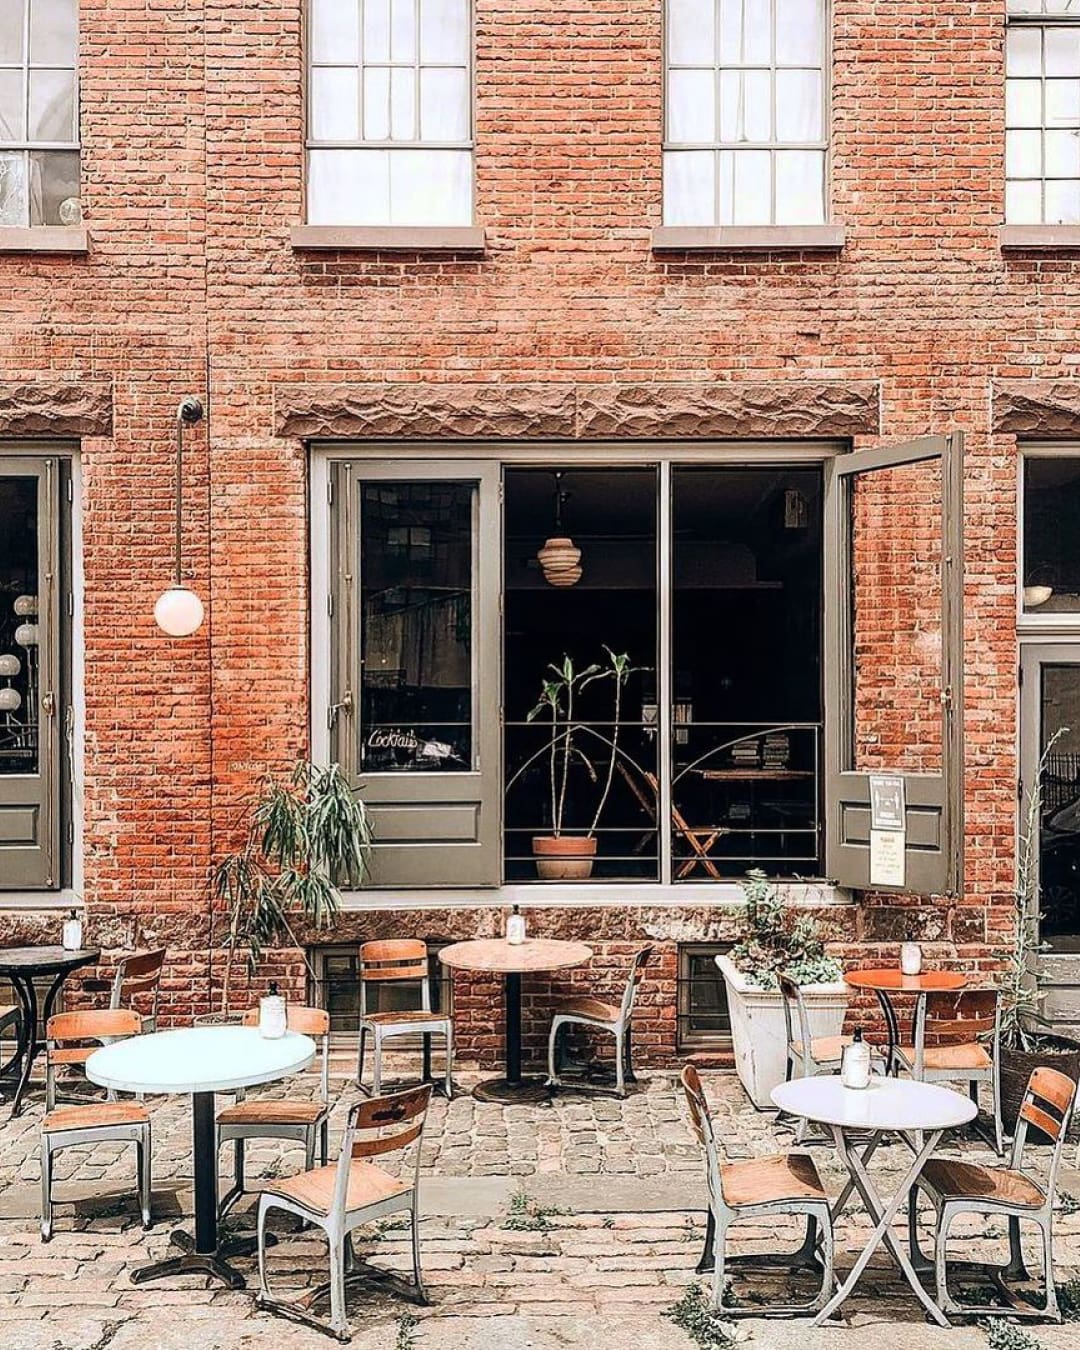 The best restaurants in Greenpoint NYC | The brick exterior and outdoor seating at Glasserie